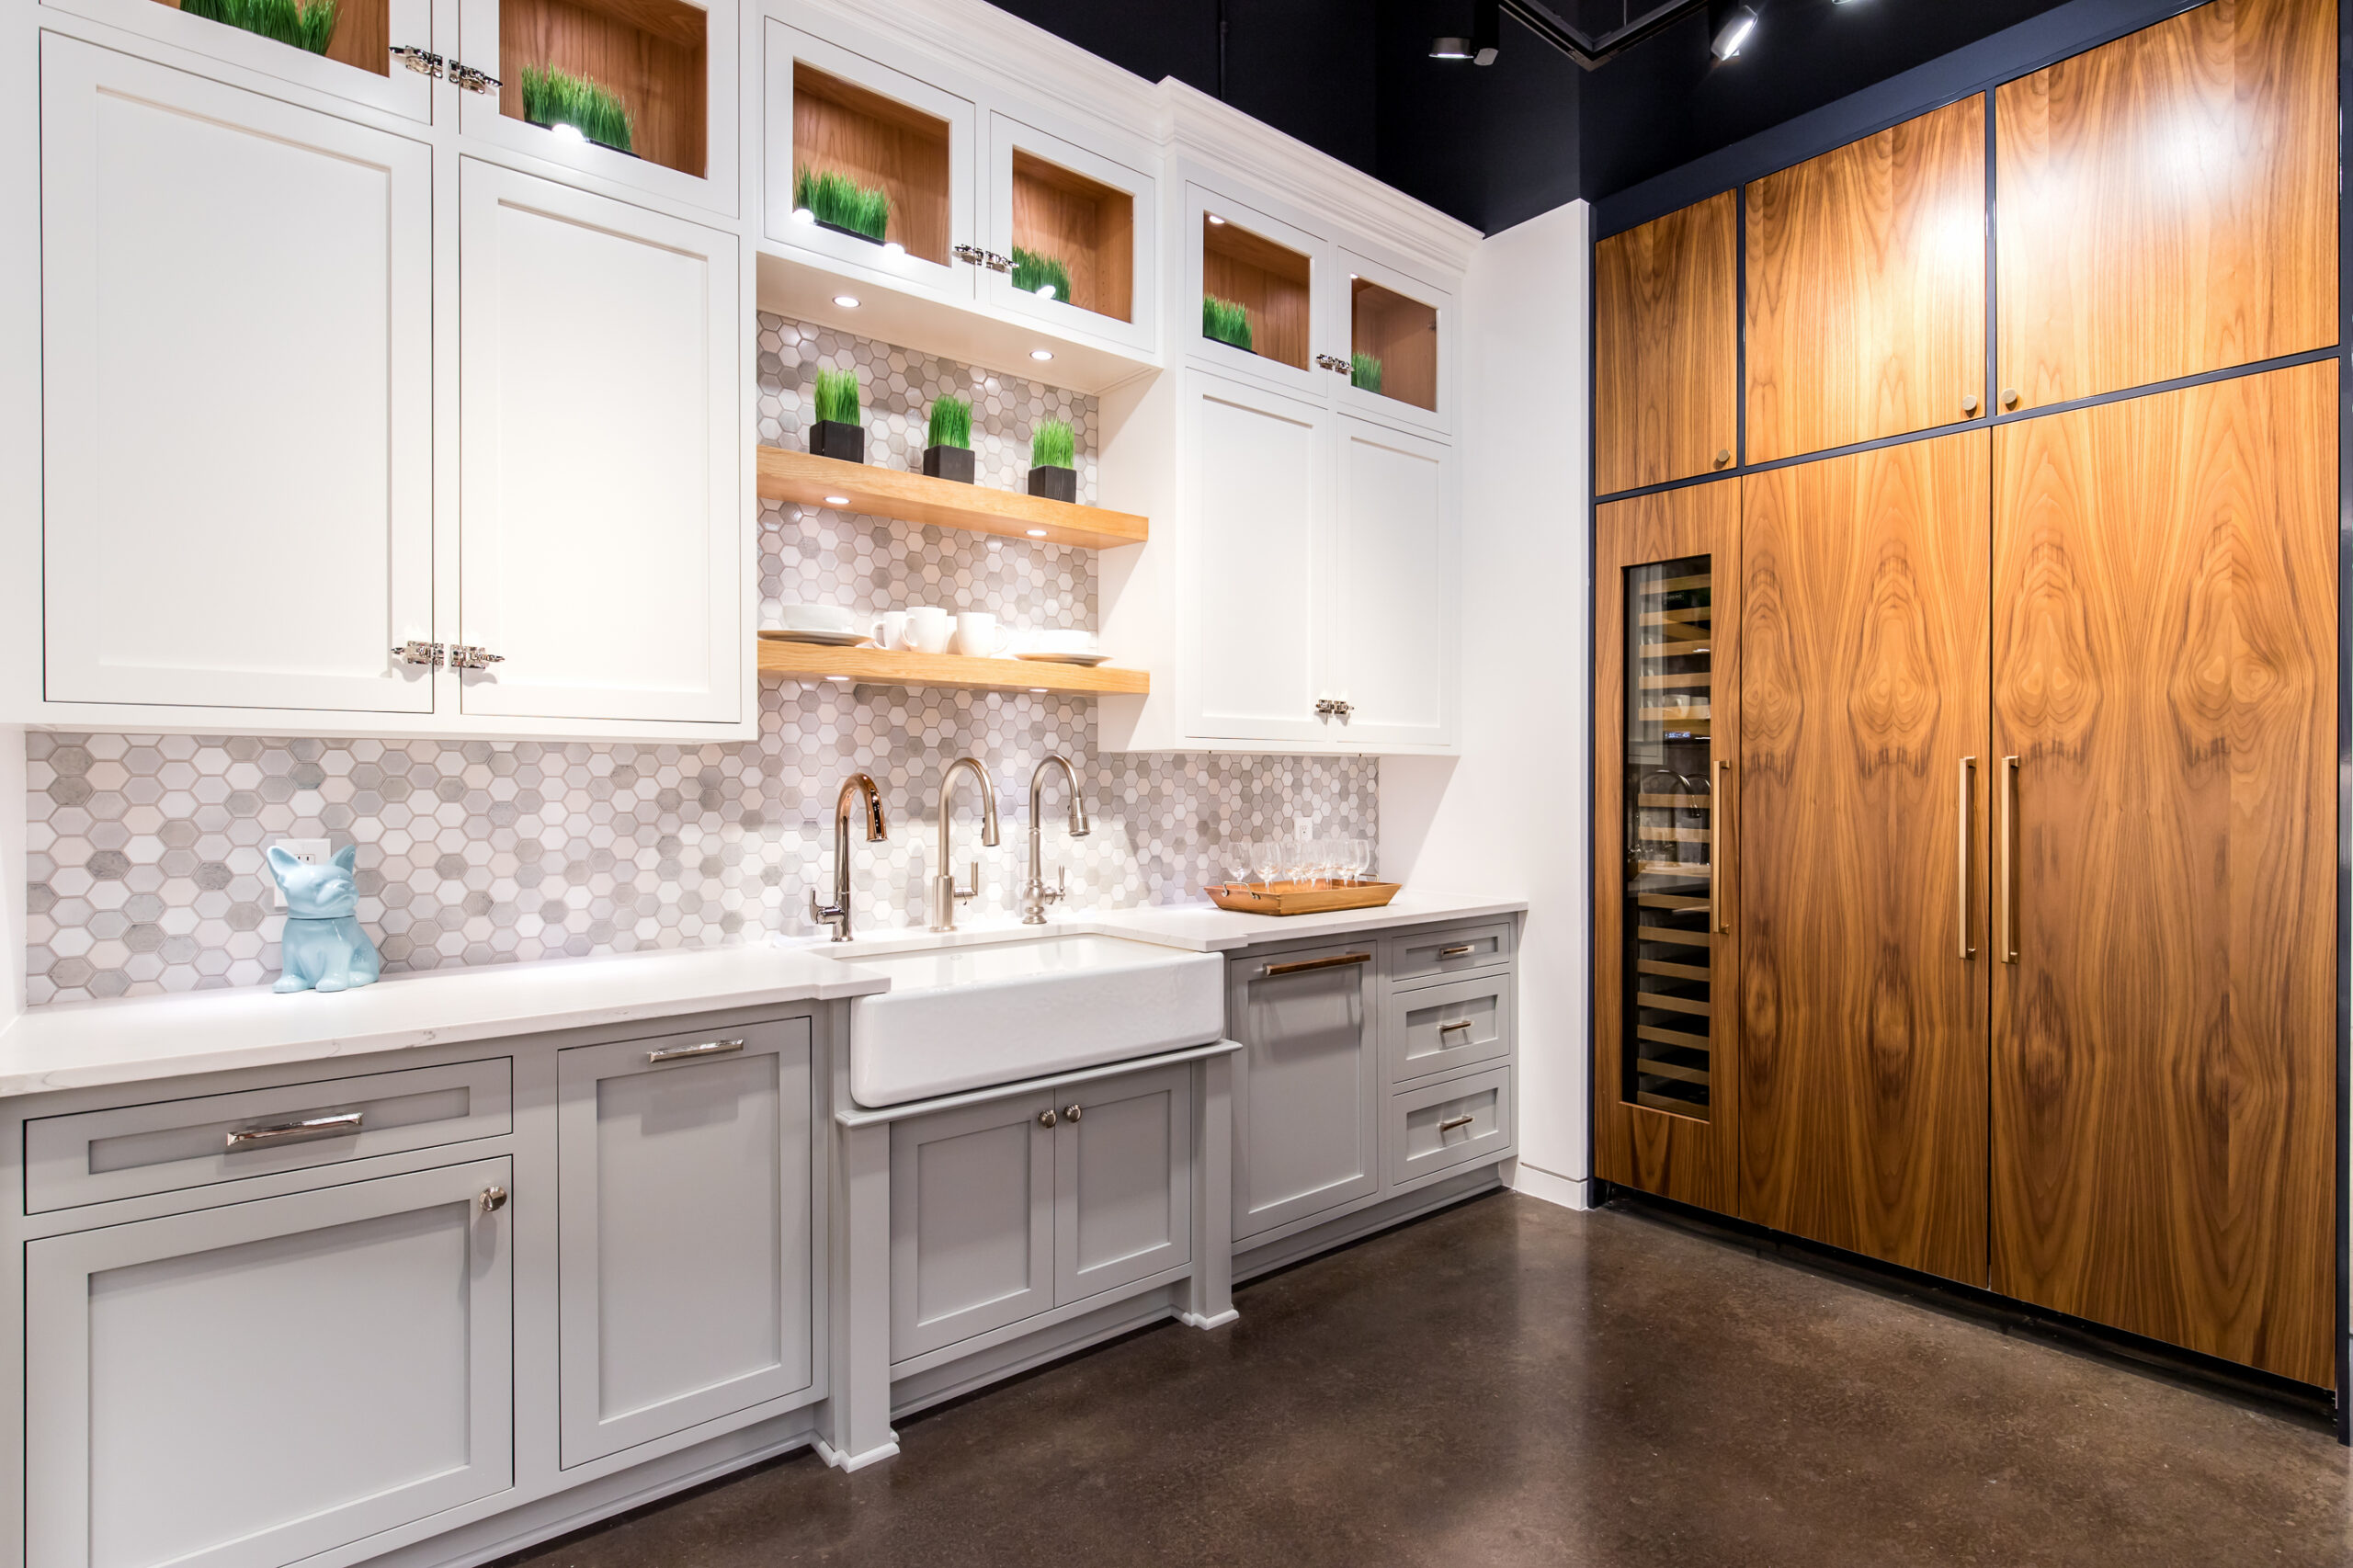 Commercial-grade kitchen with natural wood veneer finish cabinets installed by StyleCraft Cabinets TX in a Dallas property